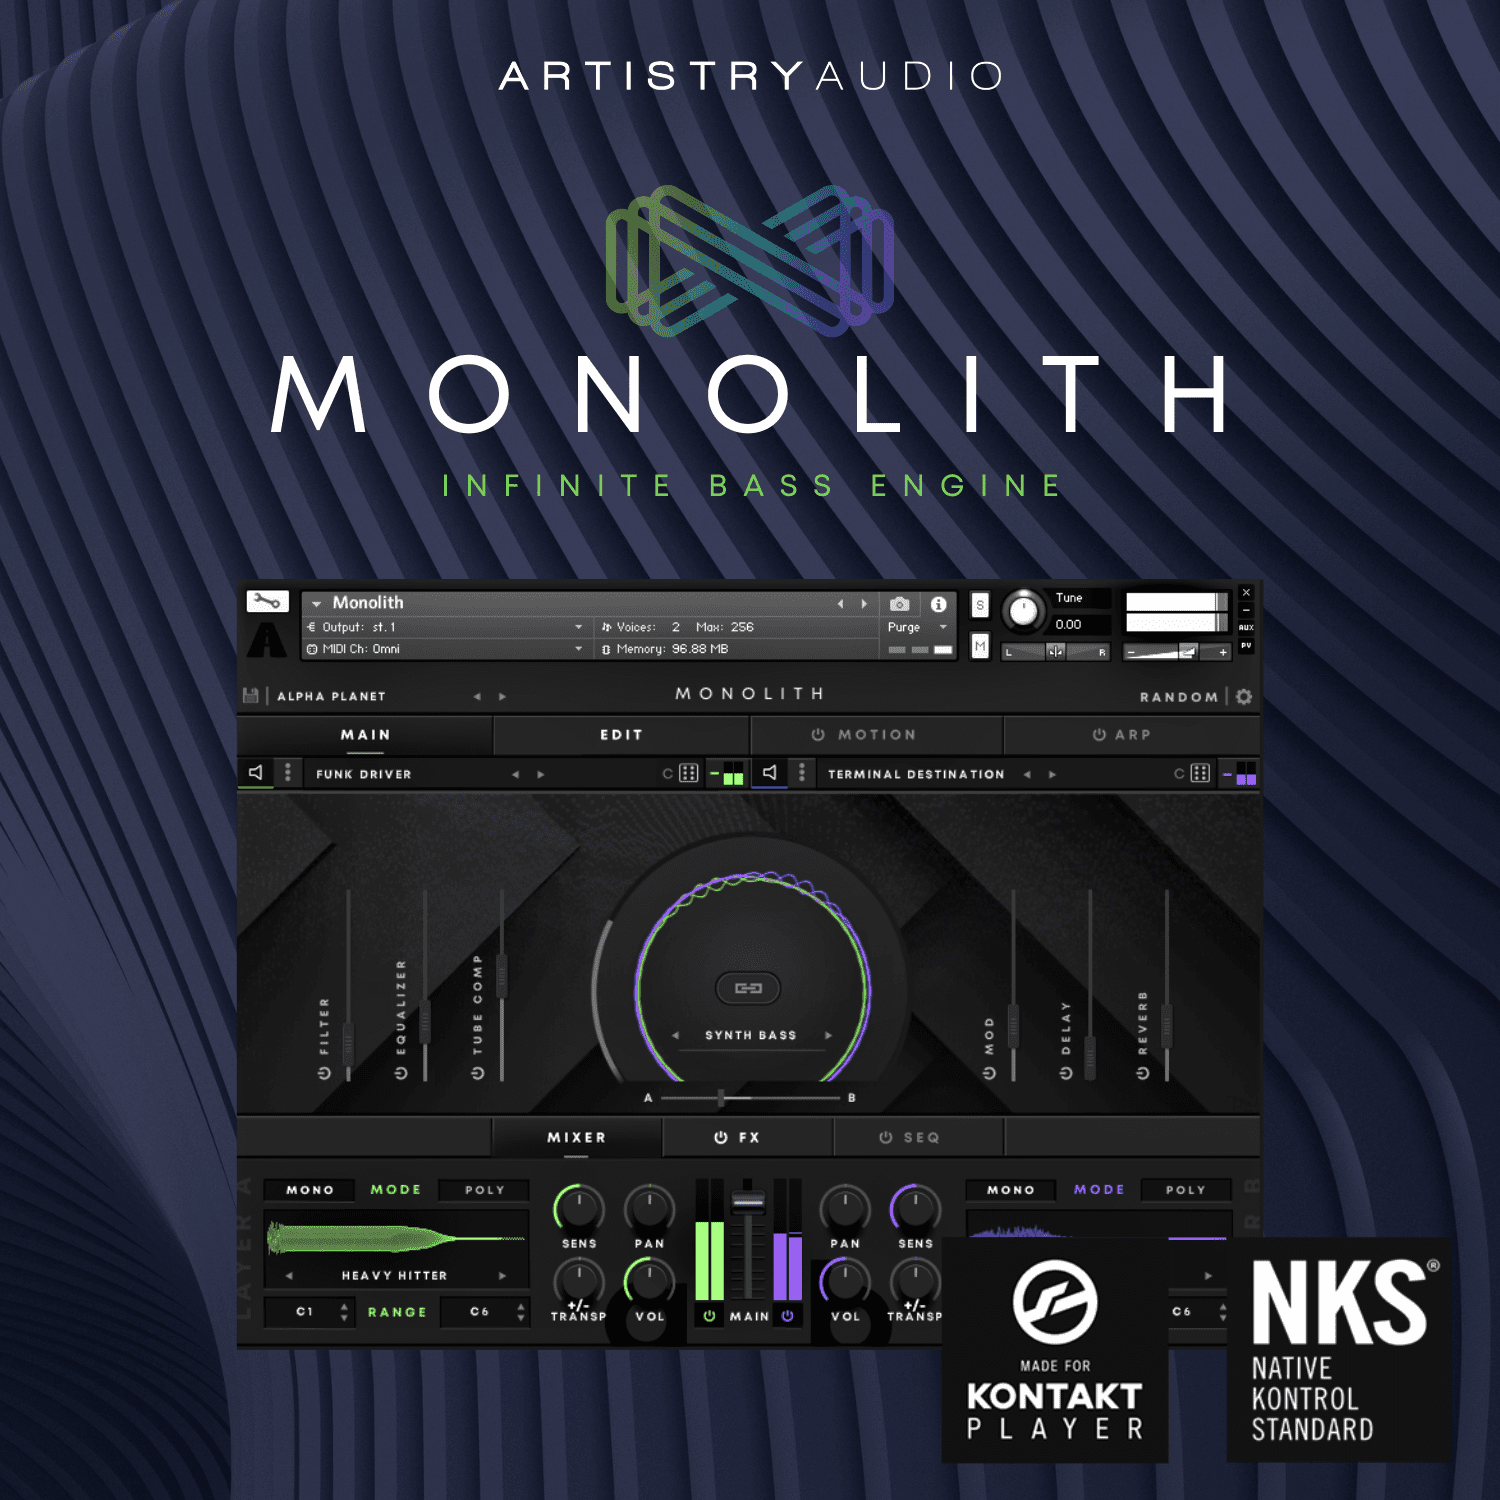 MONOLITH: The Most Powerful Bass Engine Ever Created